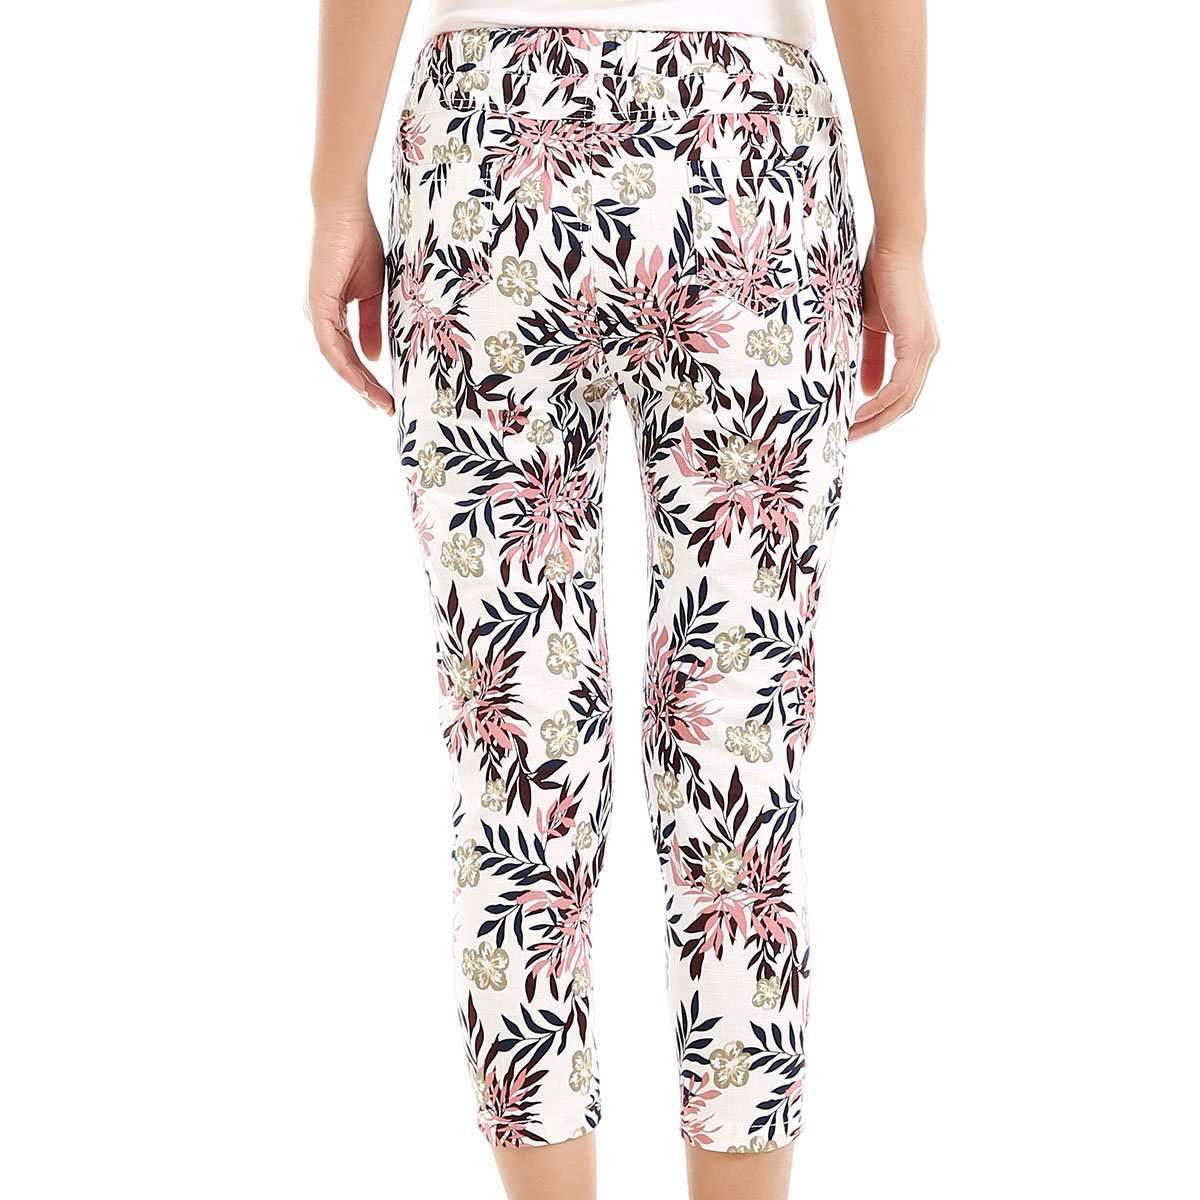 Printed Jogger Pants,Bottoms,Mad Style, by Mad Style